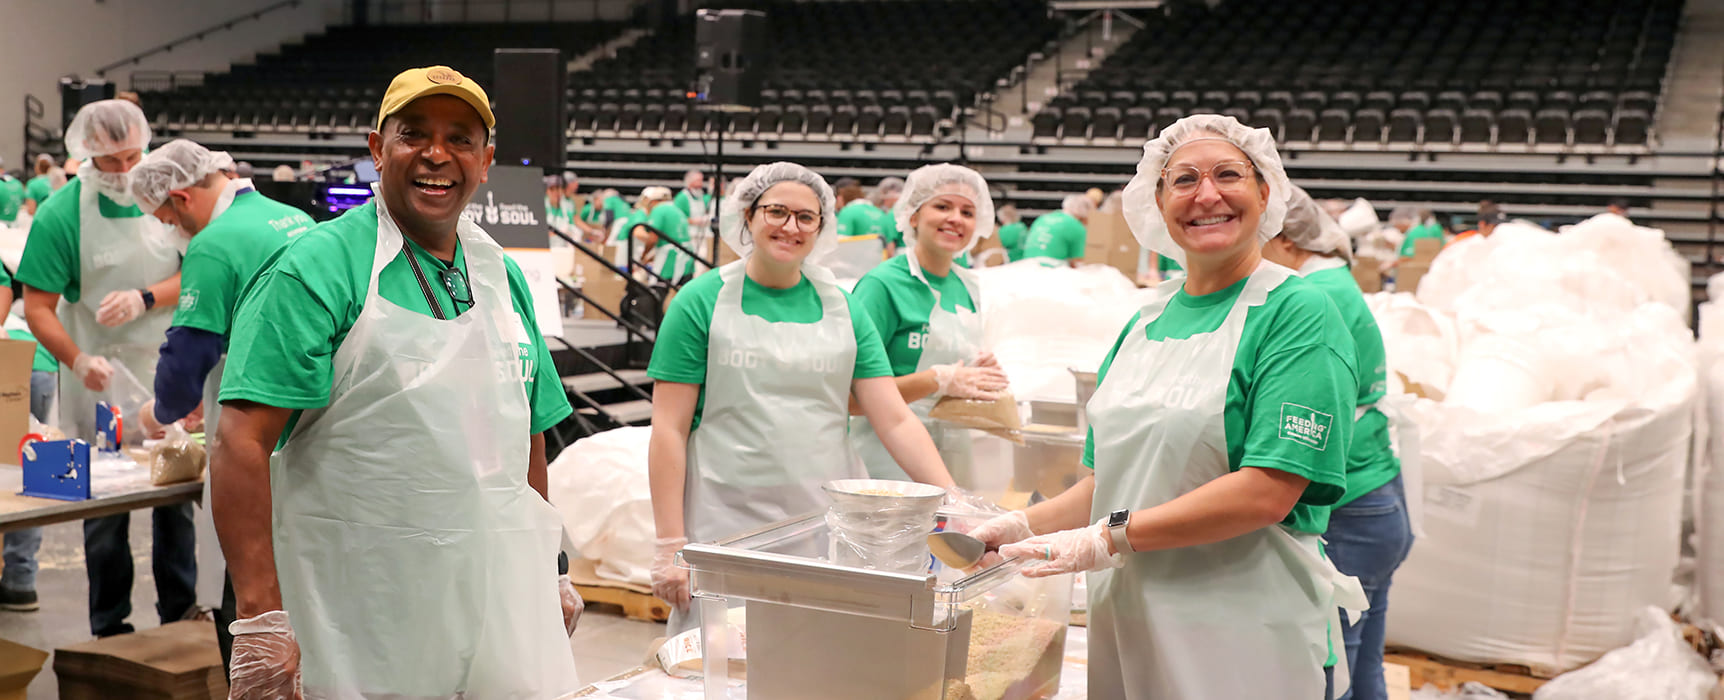 Community members volunteering at Oshkosh Corporations Feed the Body, Feed the Soul event